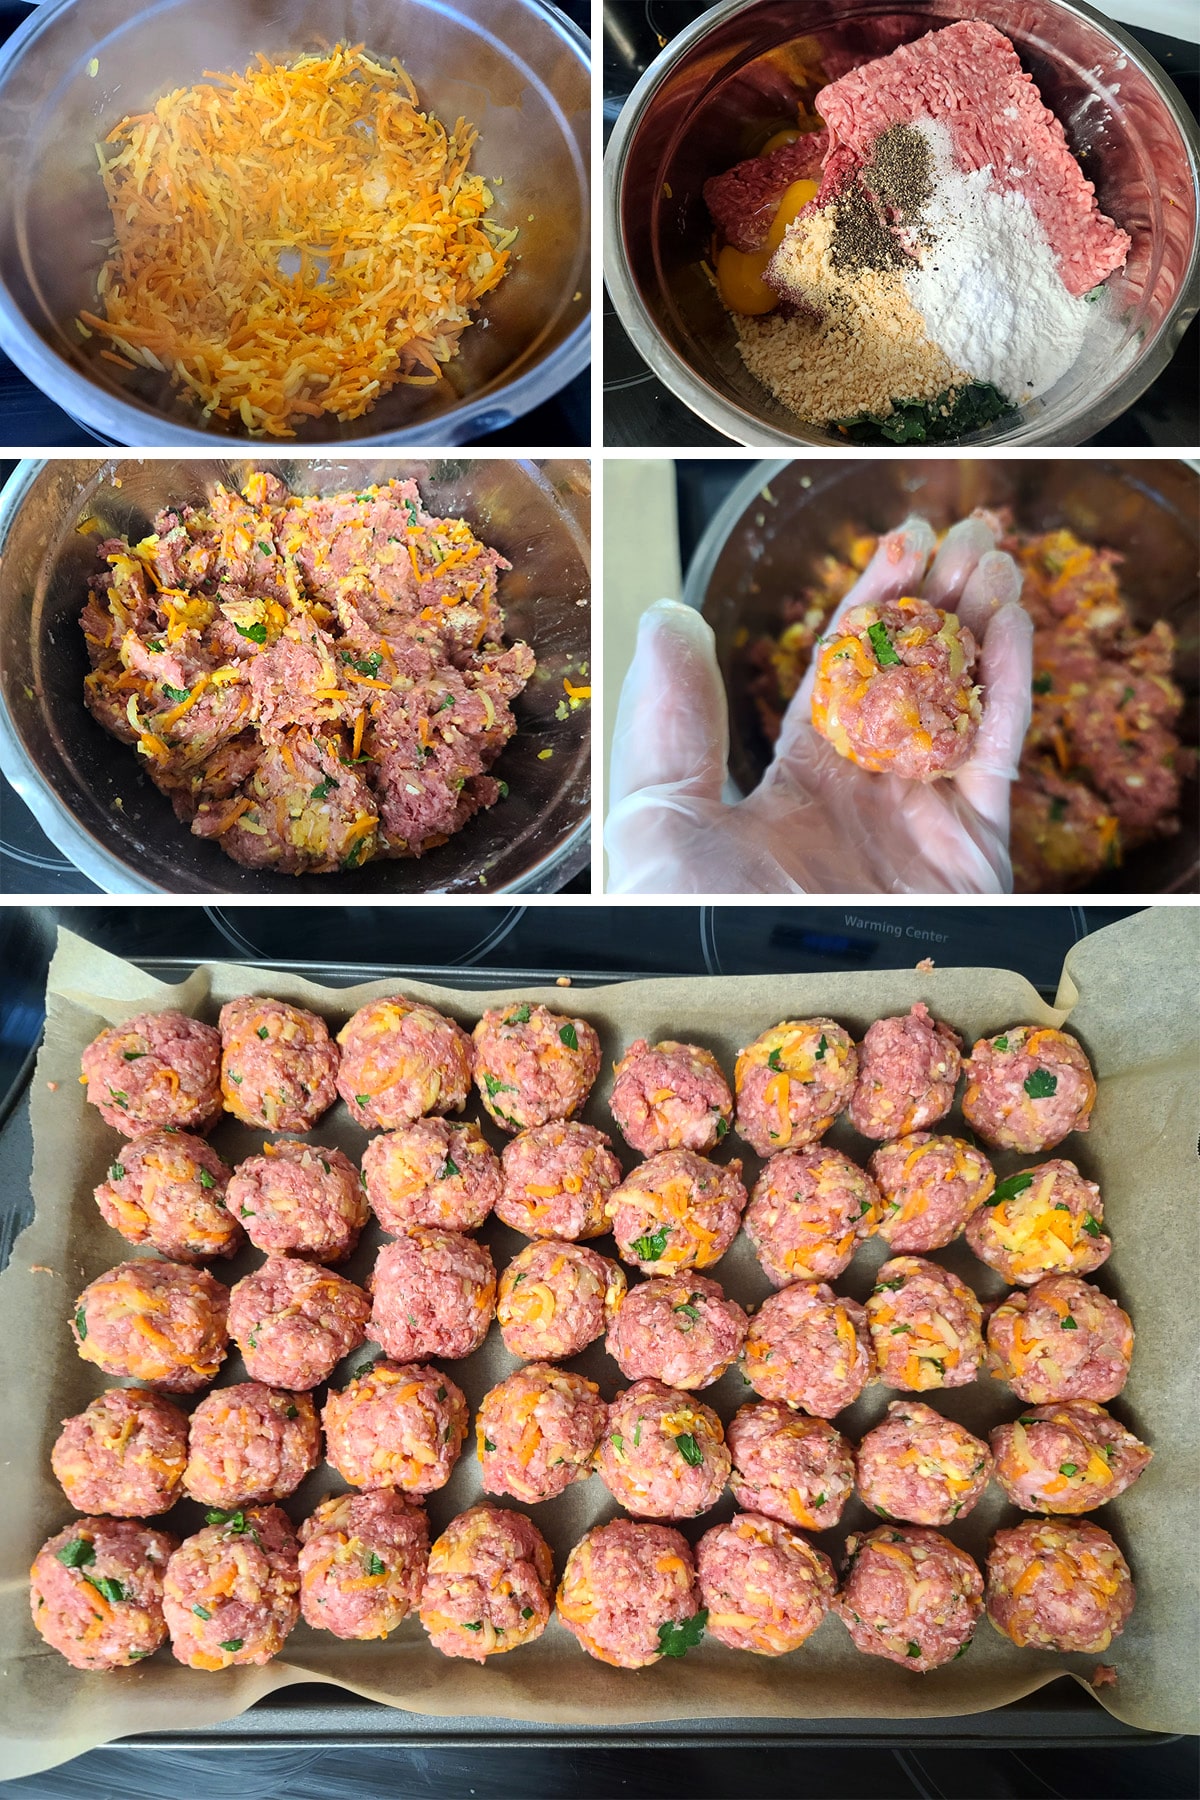 A 5 part image showing the meatball mixture being mixed together, formed into meatballs, and arranged on a large baking pan.